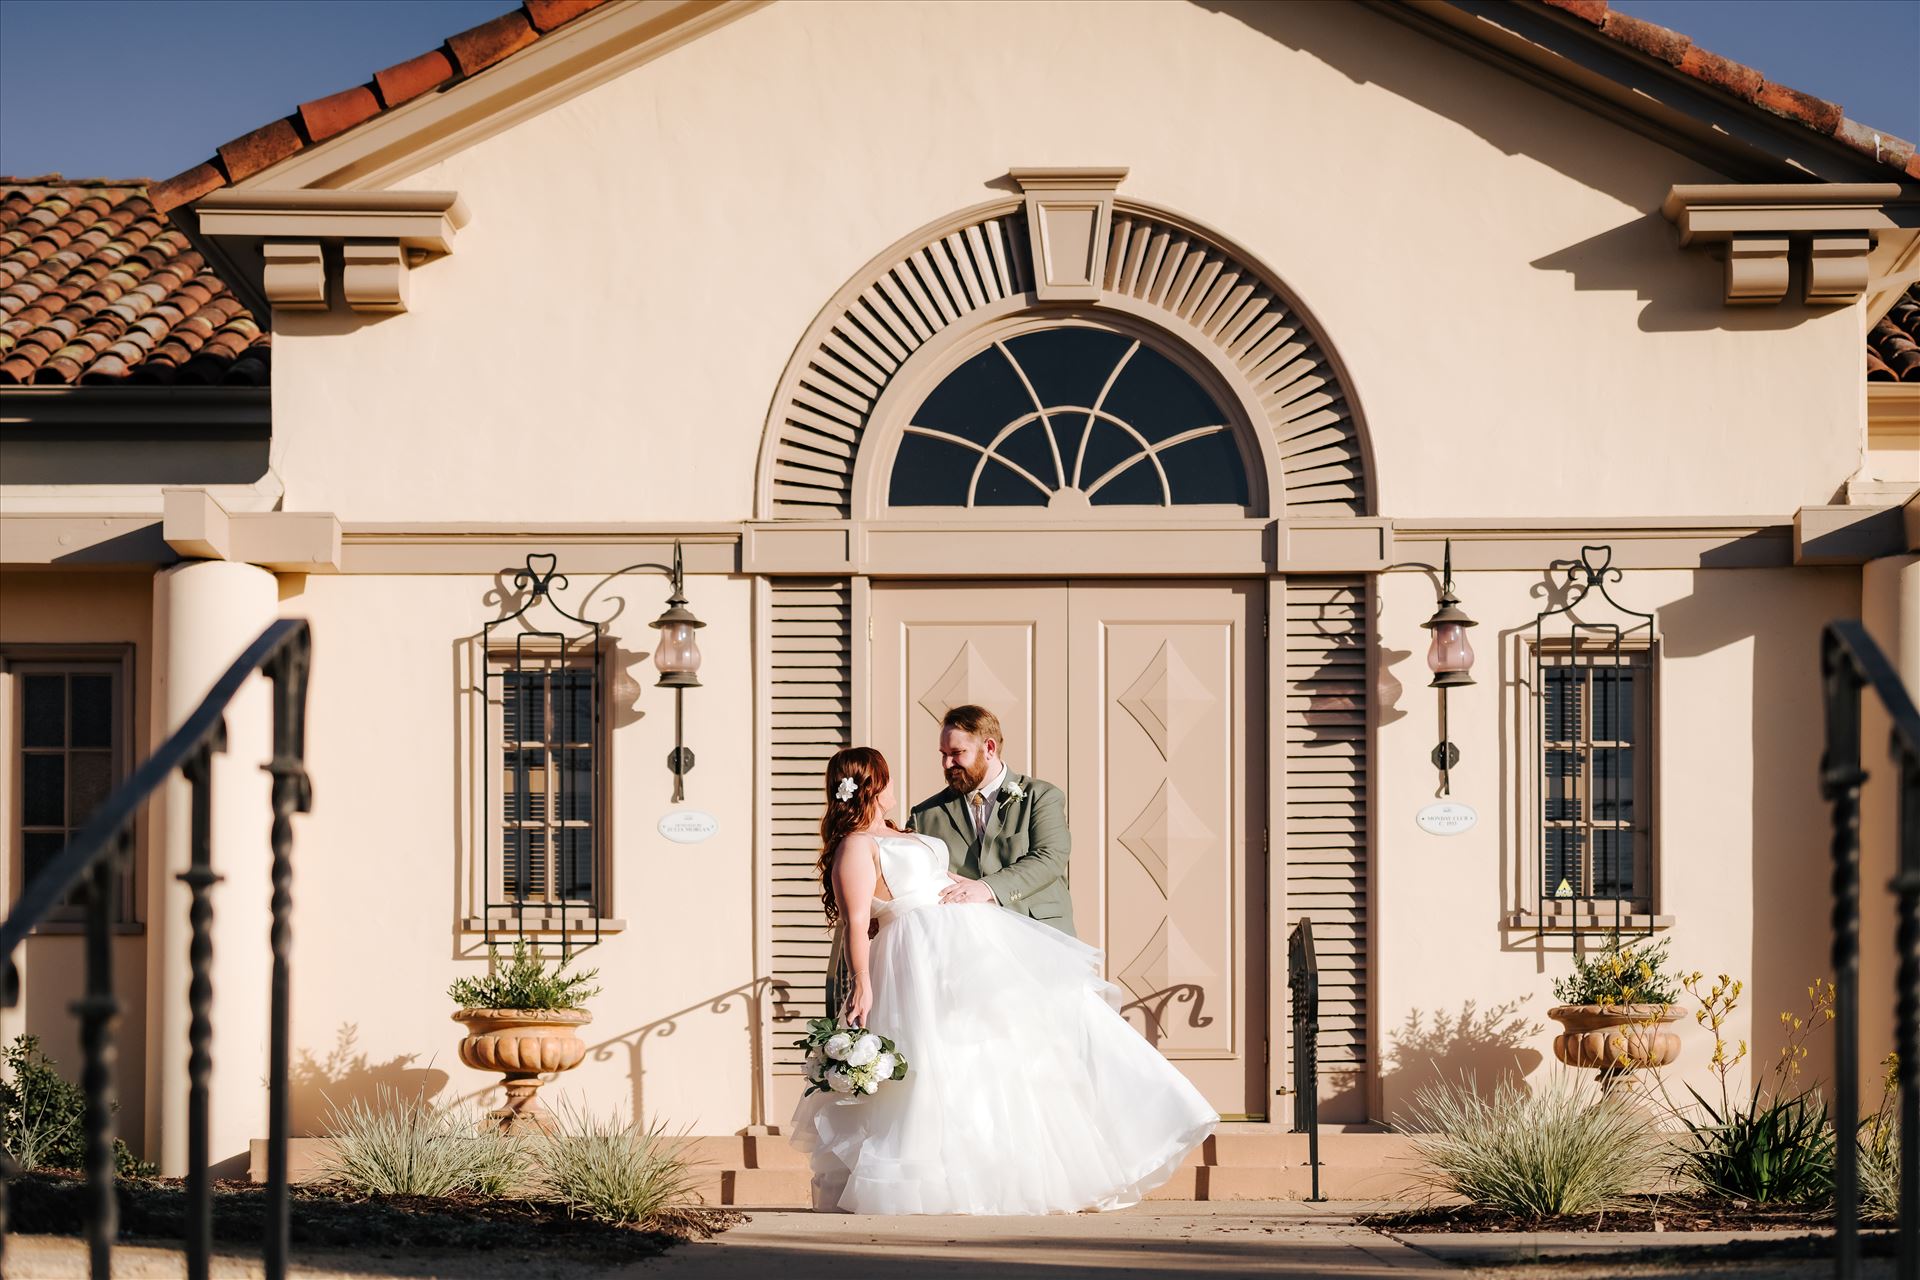 Final-4598.jpg - The Monday Club Wedding San Luis Obispo California in San Luis Obispo County by Mirror's Edge Photography.  Amazing venue for intimate weddings with mountain views. Classic Sunset Wedding Bride and Groom with boho chic flair. by Sarah Williams